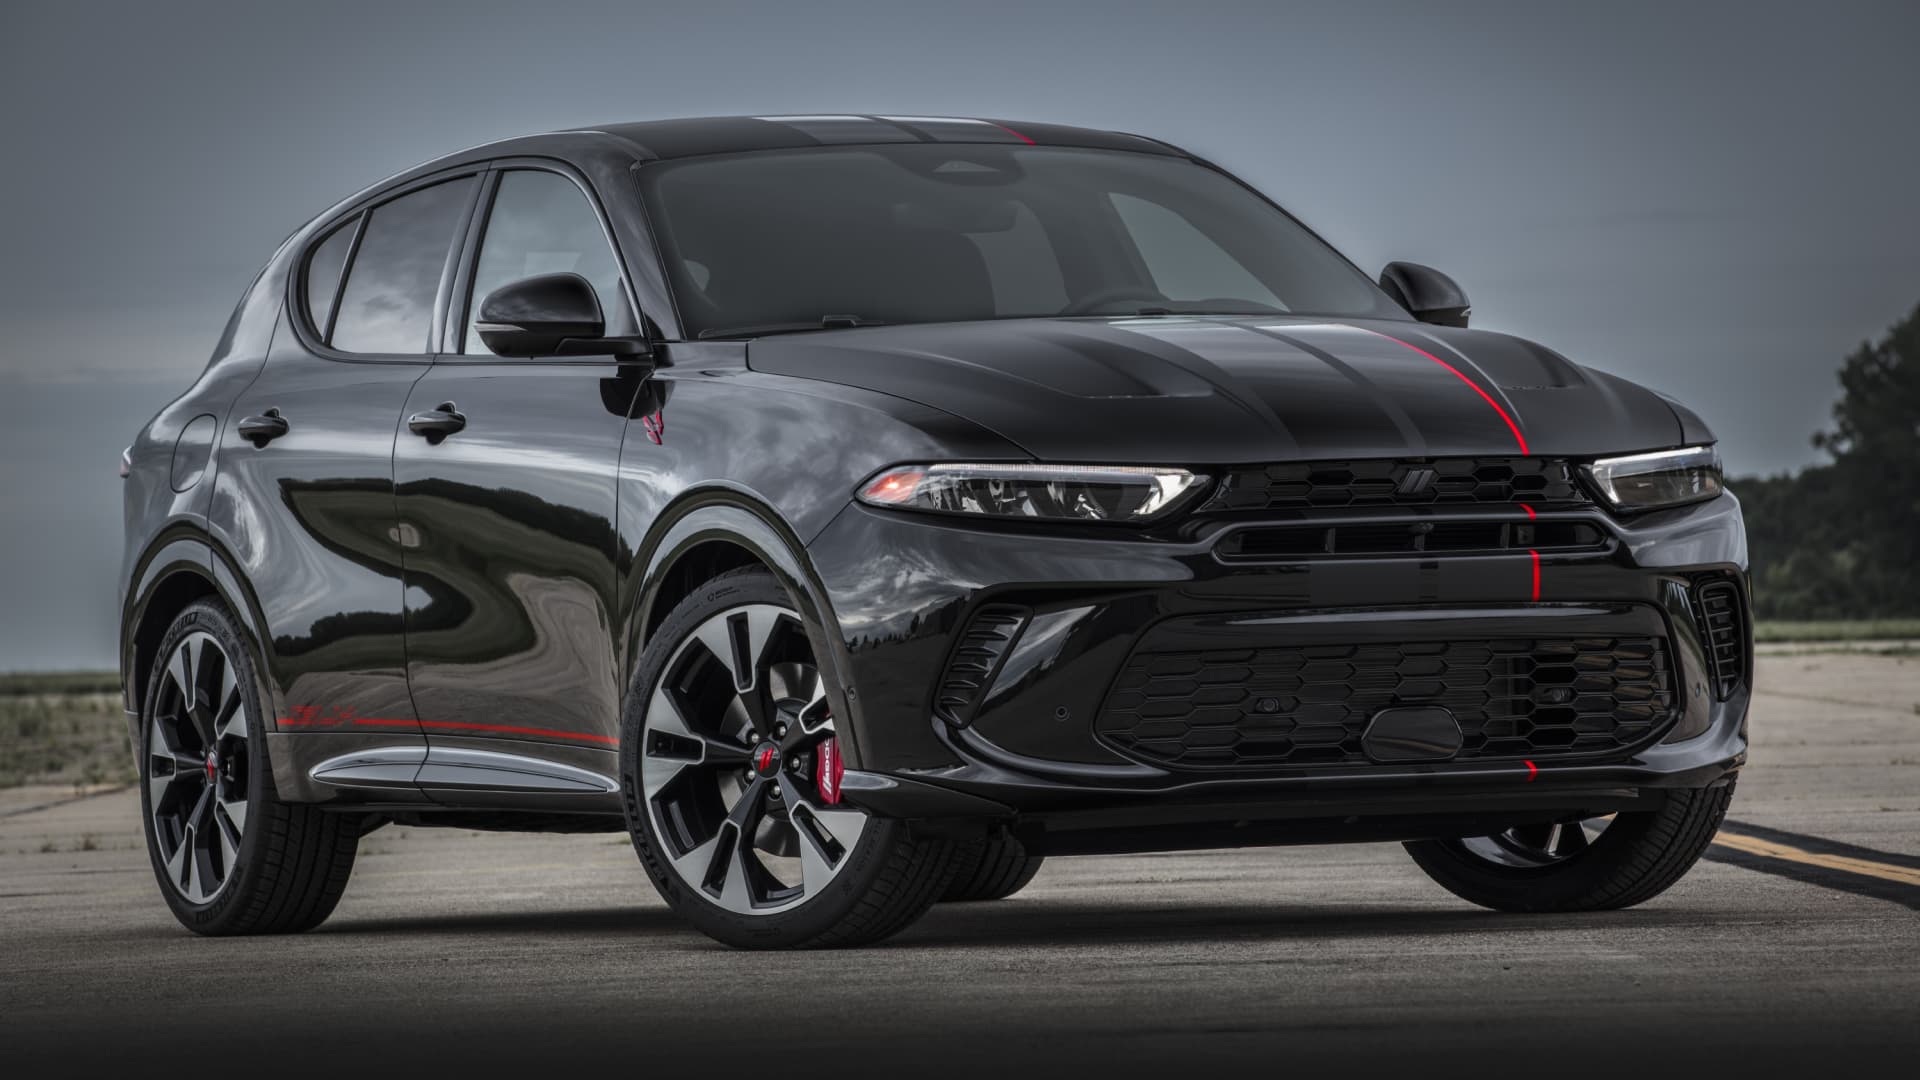 Dodge's first electrified vehicle will be a new crossover called the Hornet 